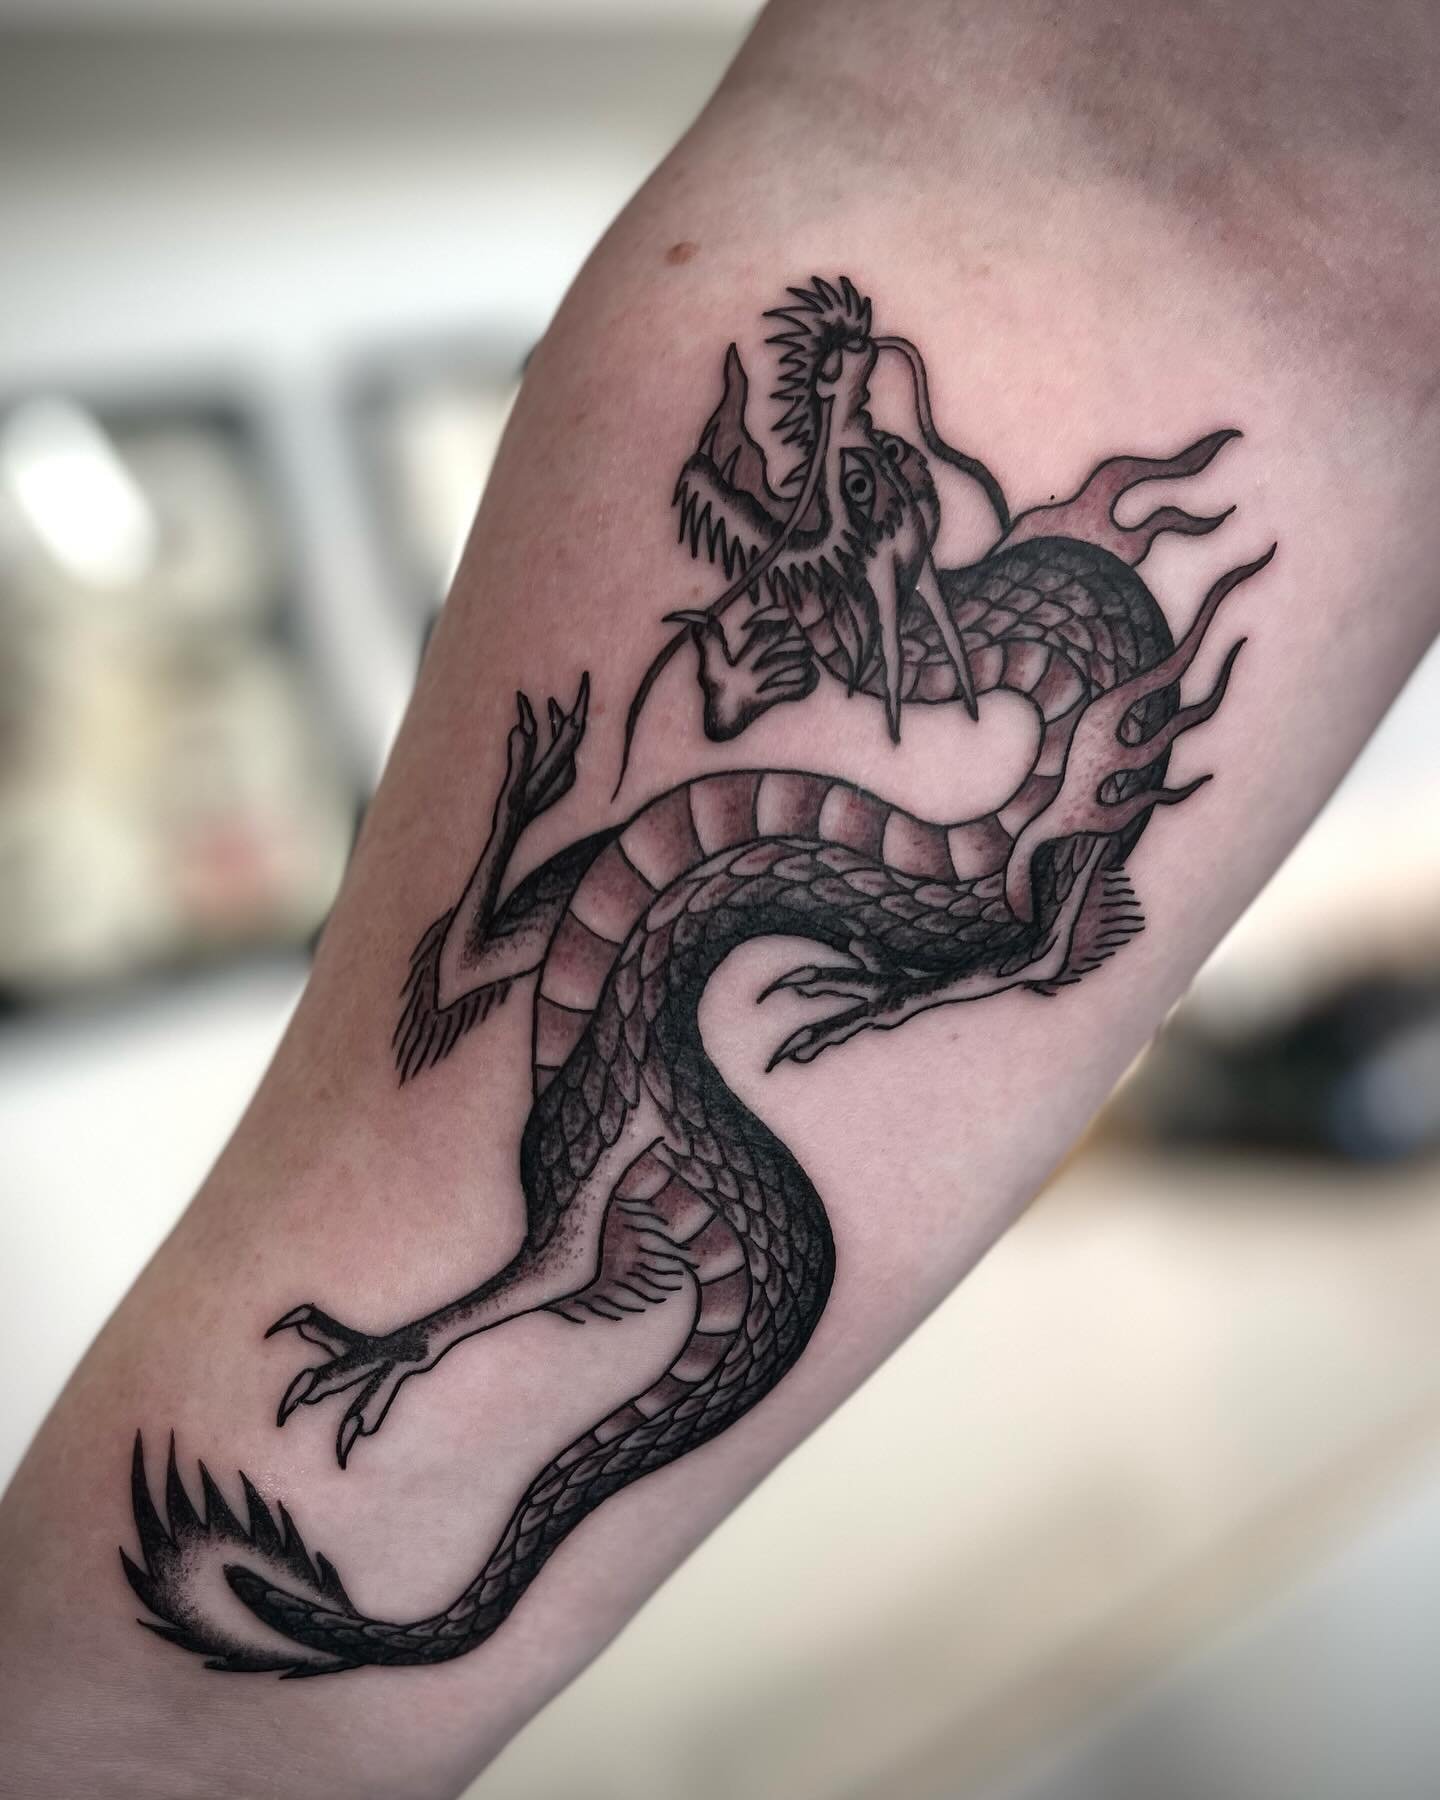 Dragon for @spud_tigger today . I really enjoyed doing this one and thanks again for trusting me with your first tattoos 🙏🏻👊🏻 🐉 DM or email rocksteadytattoouk@gmail.com